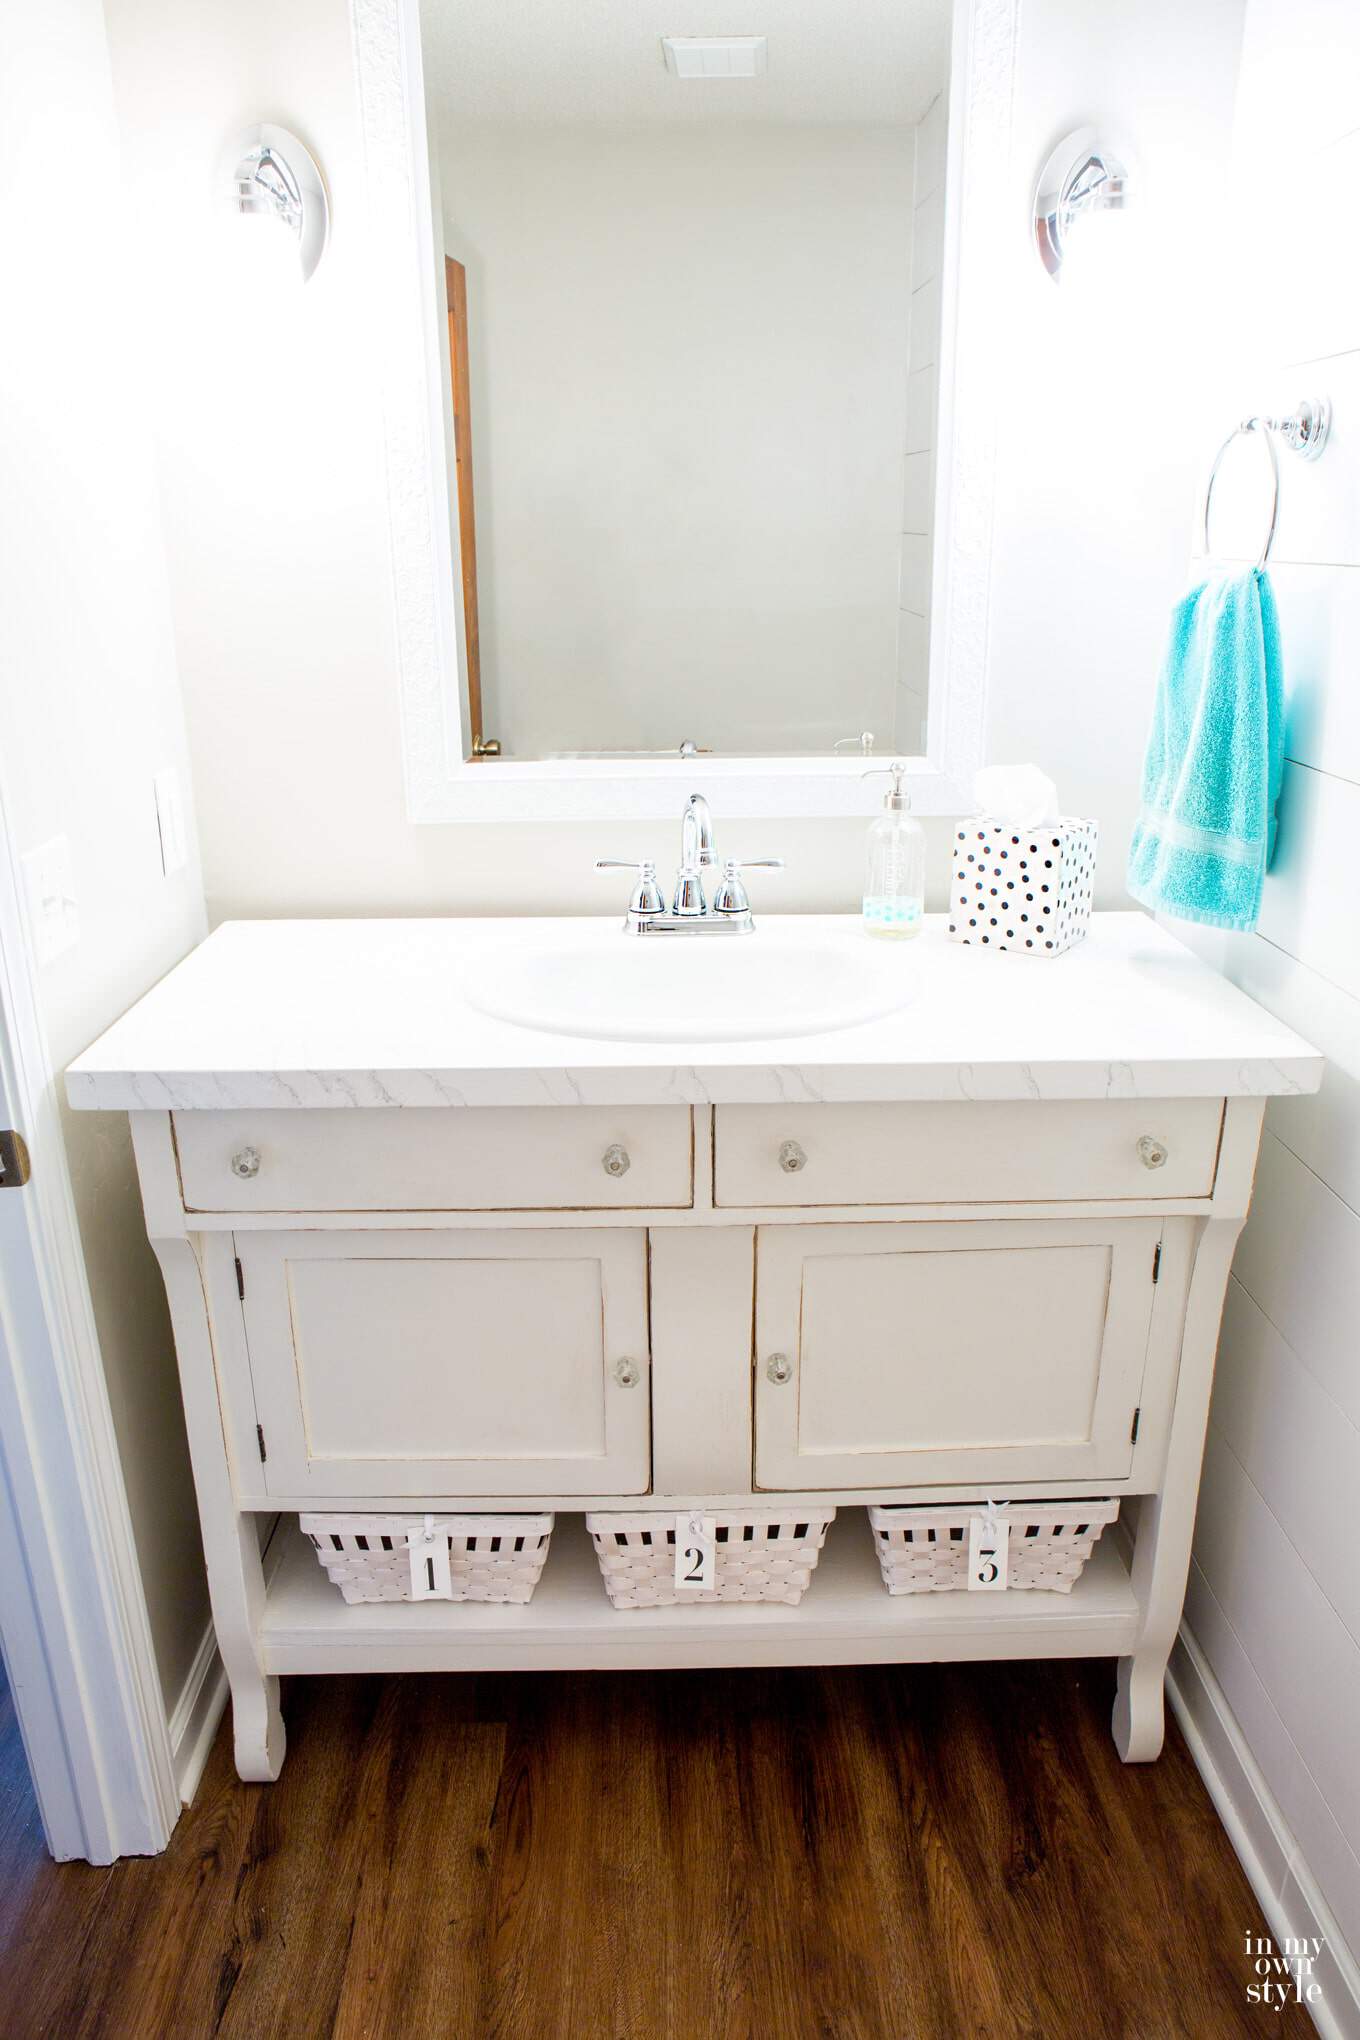 You can also use any type of countertop you want to when you grab an old dresser as a vanity